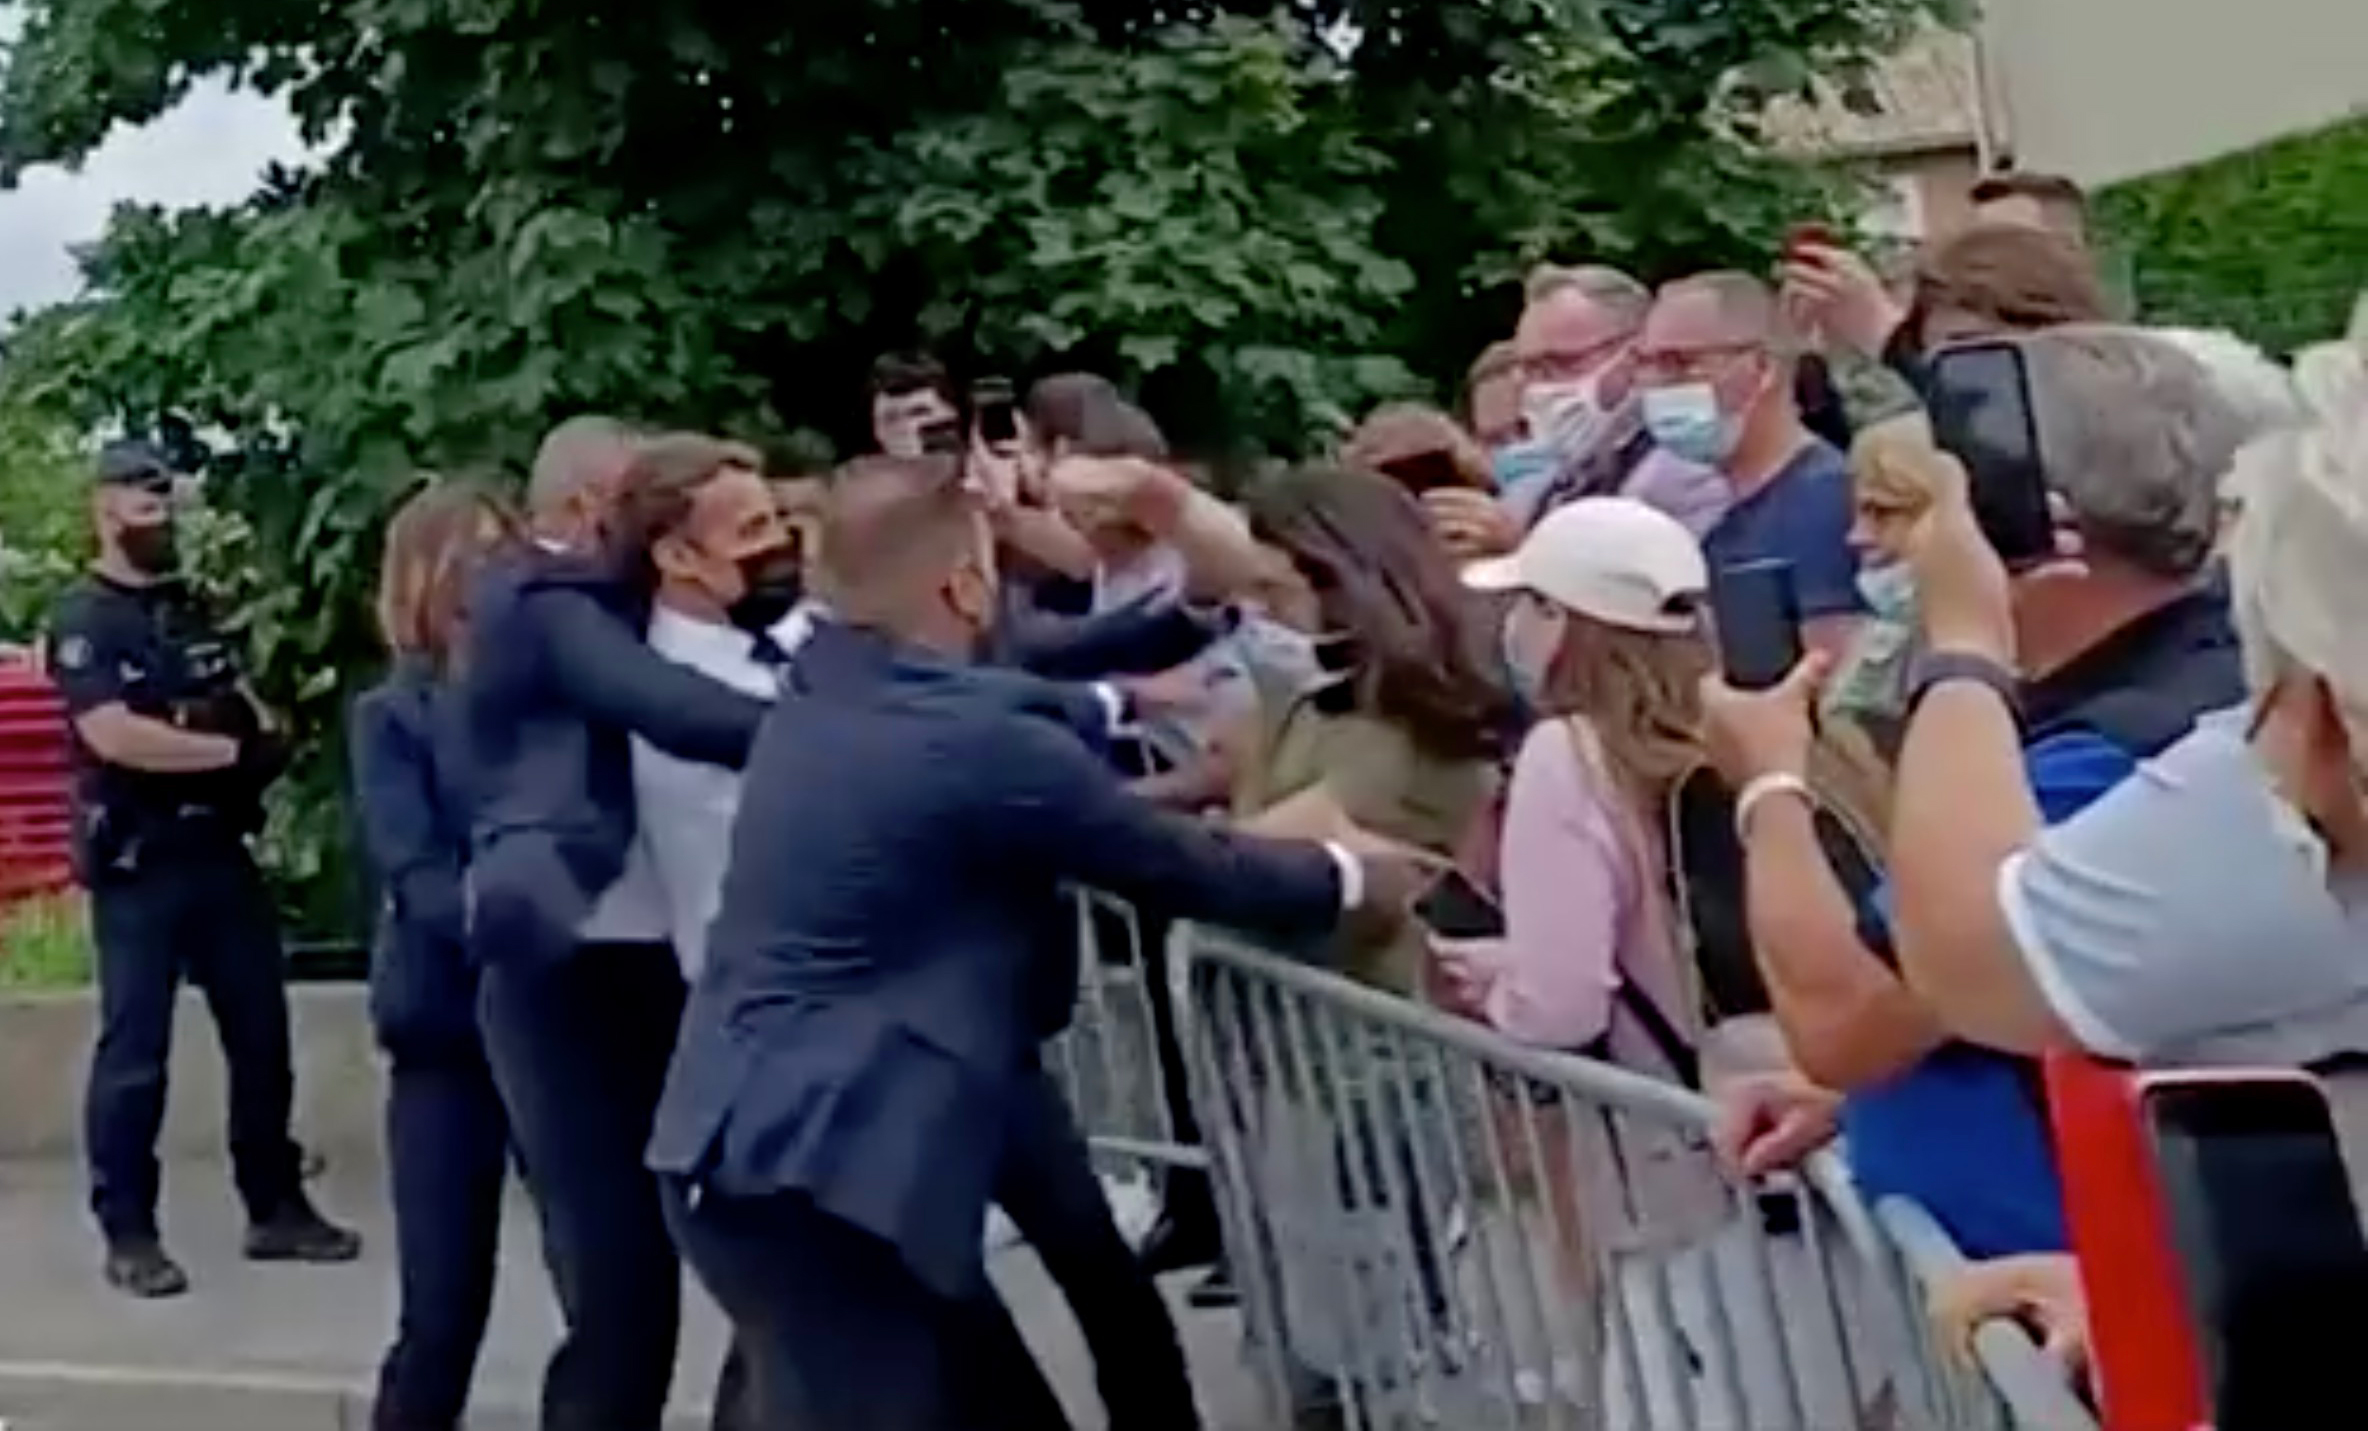 French President Emmanuel Macron is slapped in the face by a member of the public during a visit to Tain-l'Hermitage, France, June 8, 2021. BFMTV via Reuters TV